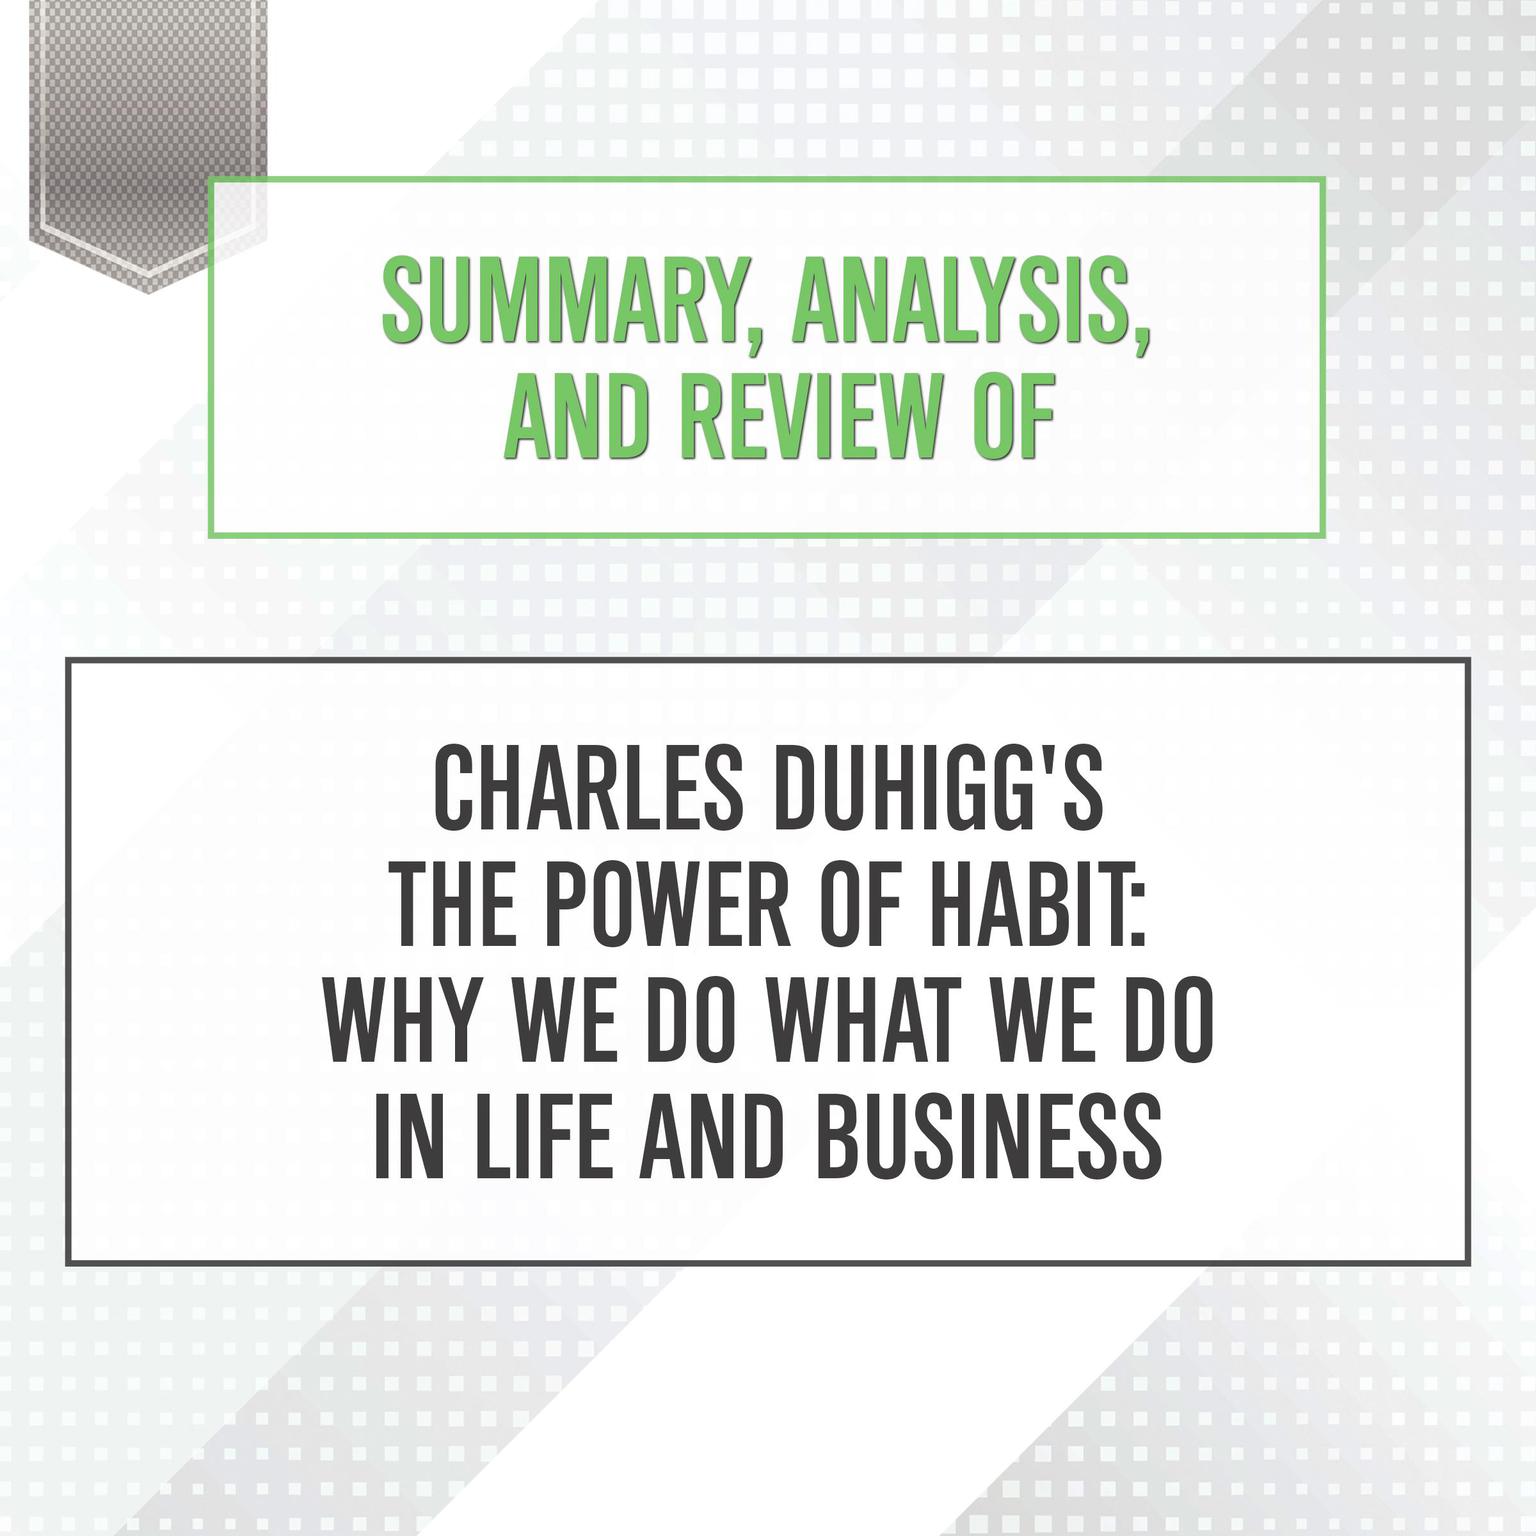 Summary, Analysis, and Review of Charles Duhiggs The Power of Habit: Why We Do What We Do in Life and Business Audiobook, by Start Publishing Notes